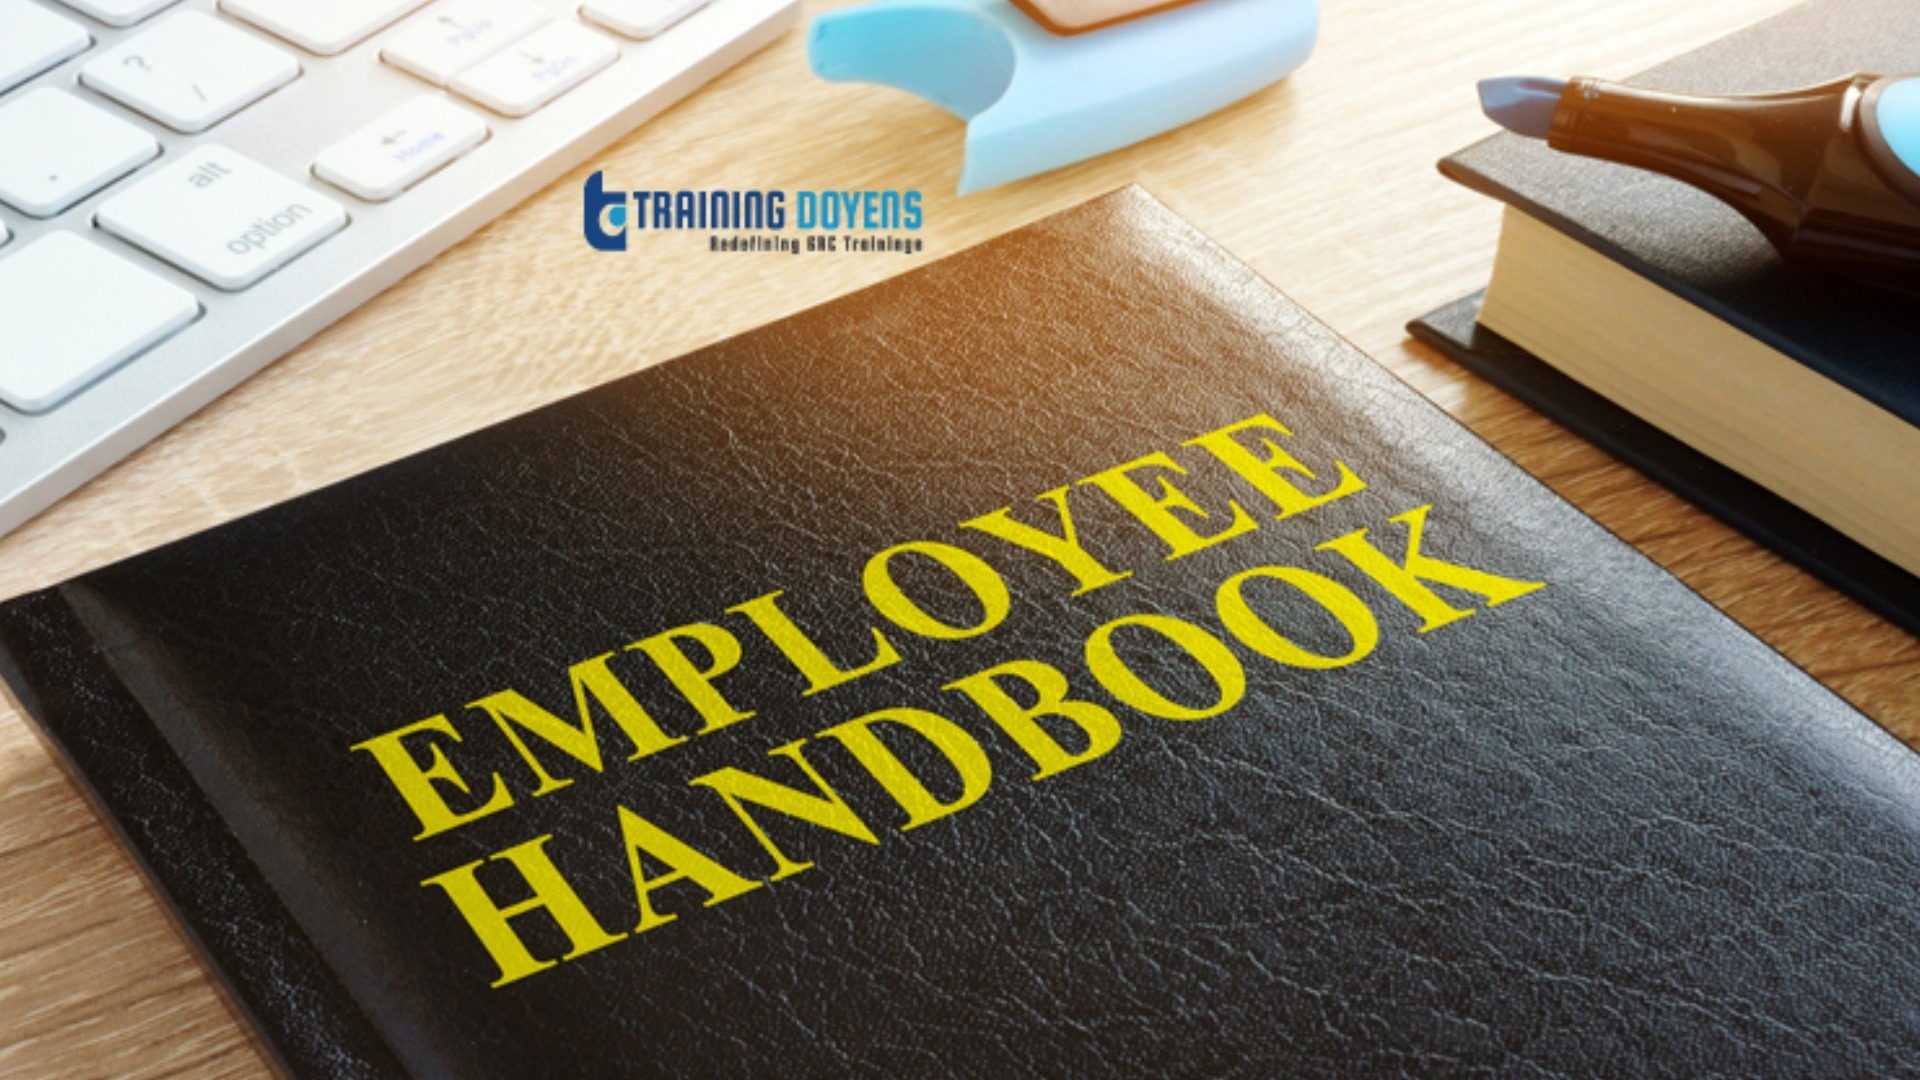 Employee handbooks: issues and best practices for 2020, Denver, Colorado, United States